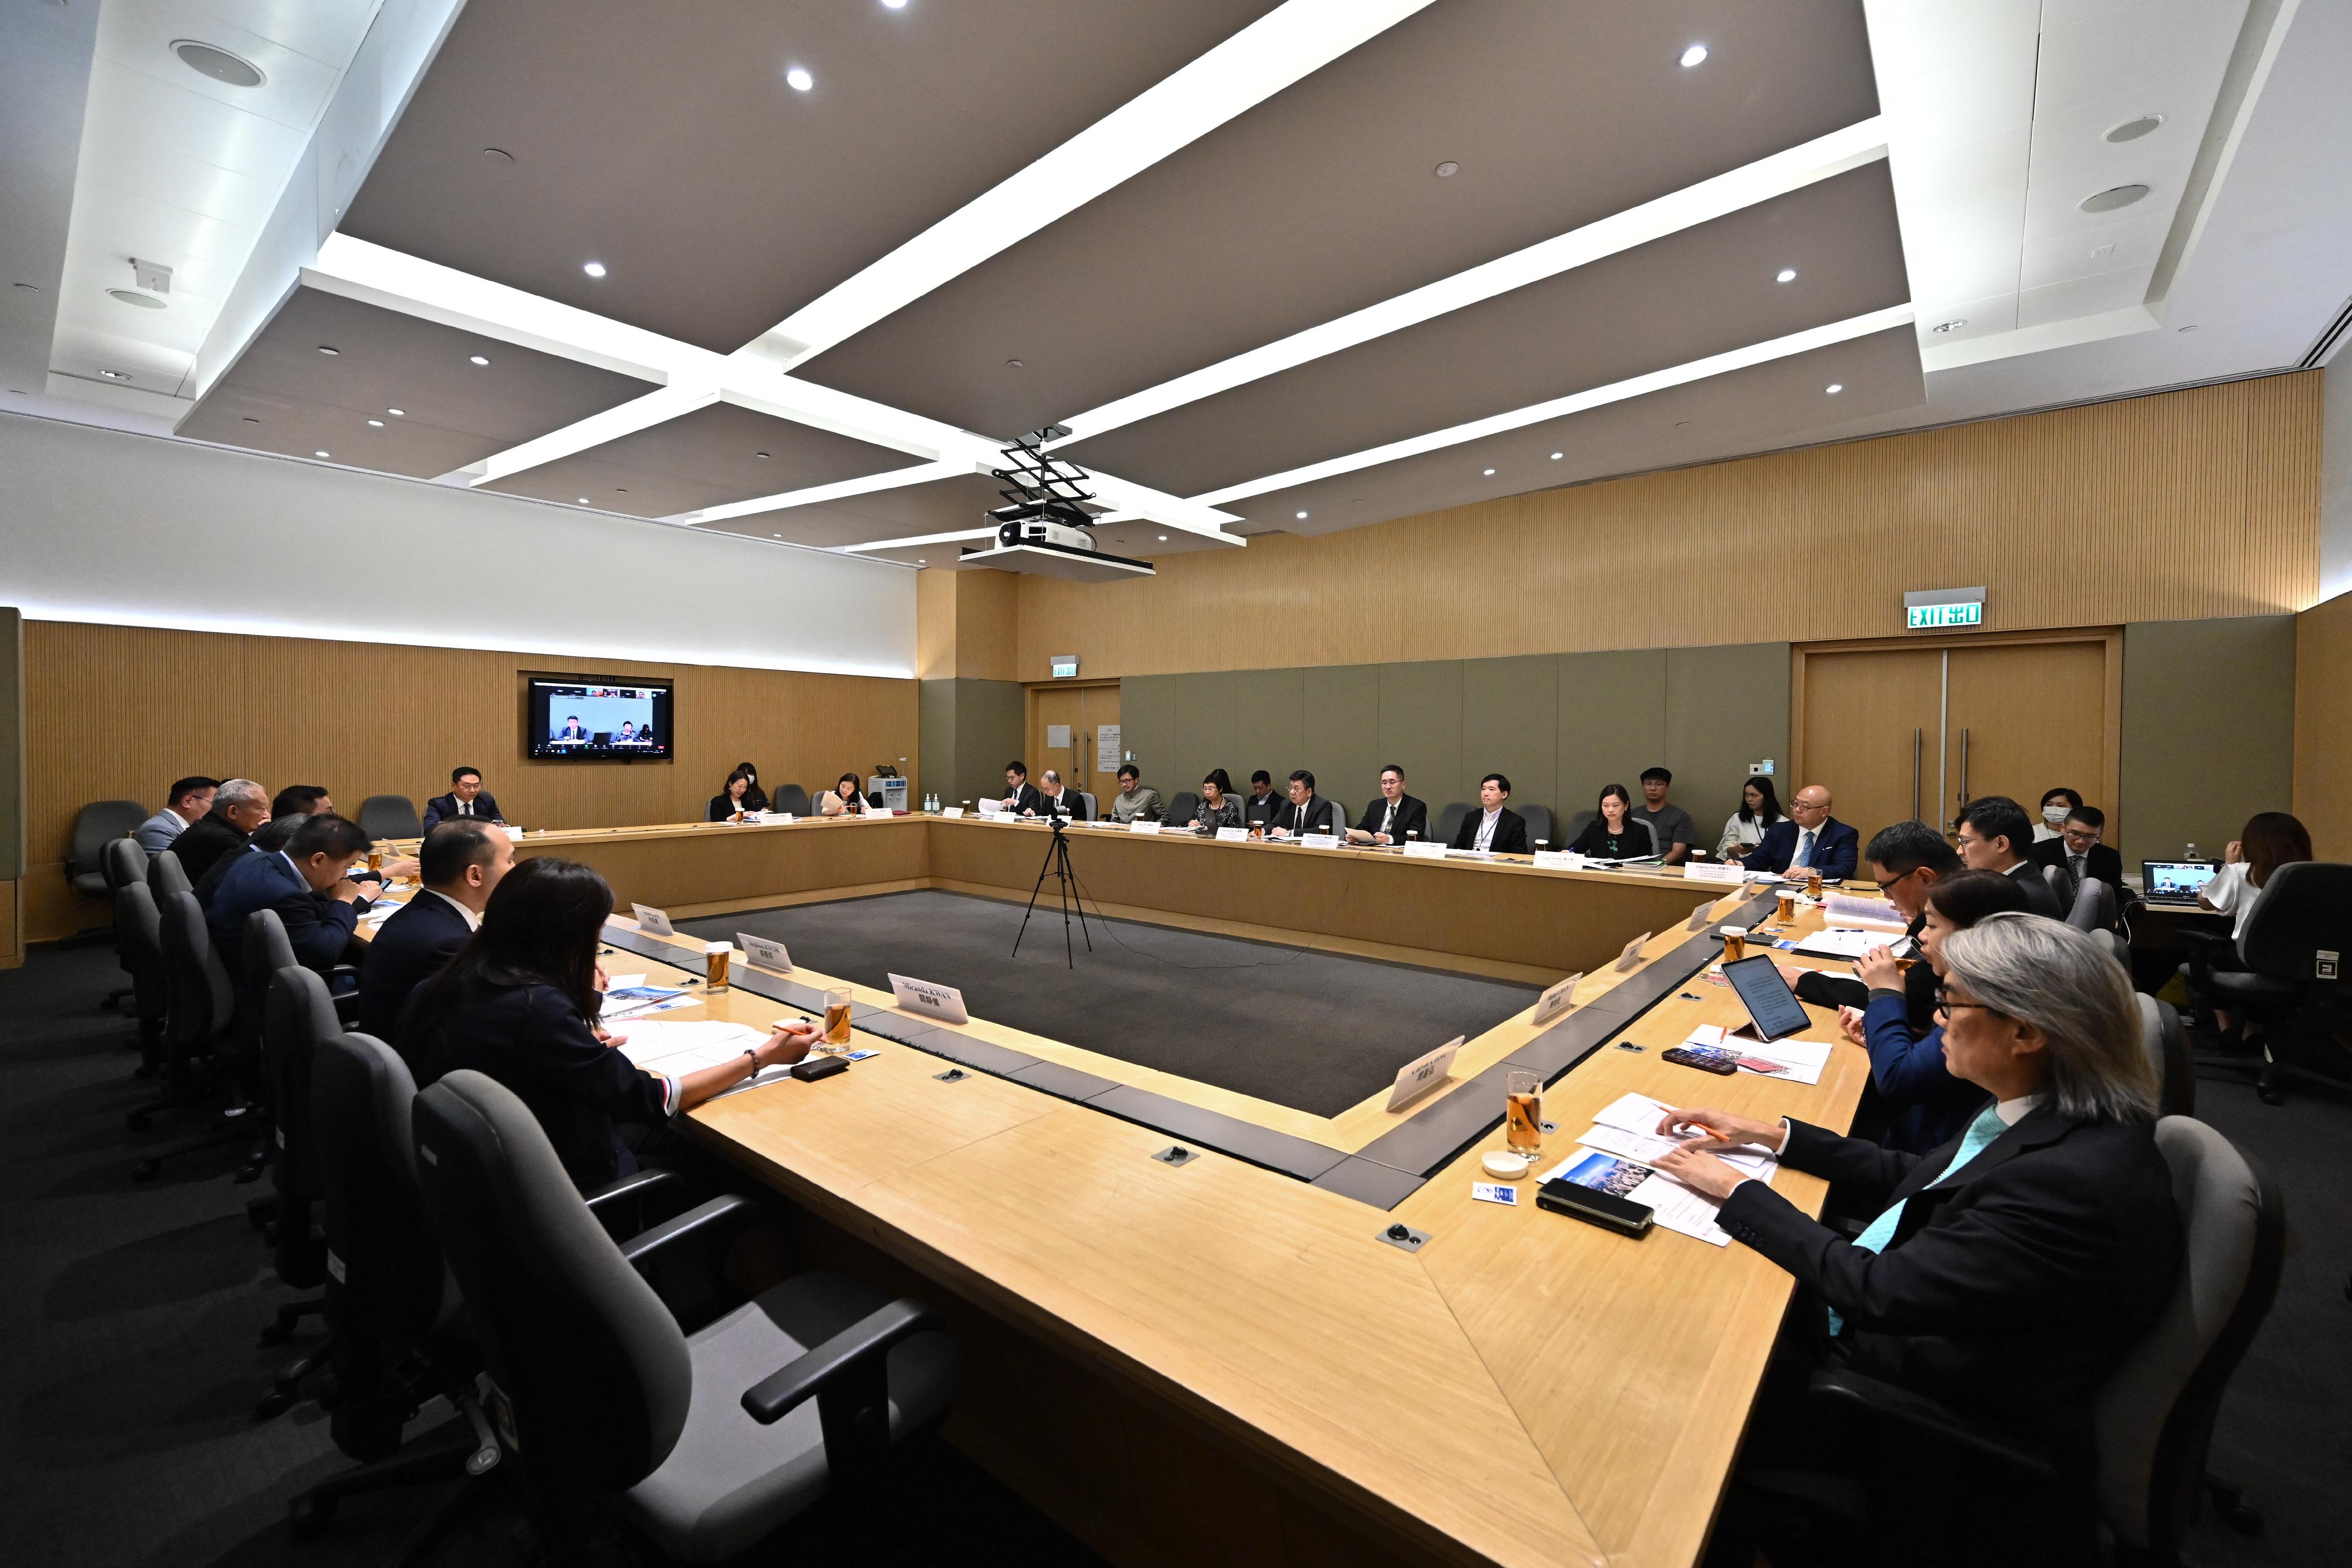 The Secretary for Commerce and Economic Development, Mr Algernon Yau, briefed members of the Trade and Industry Advisory Board on initiatives related to commerce and trade in "The Chief Executive's 2023 Policy Address" at a meeting today (October 30).